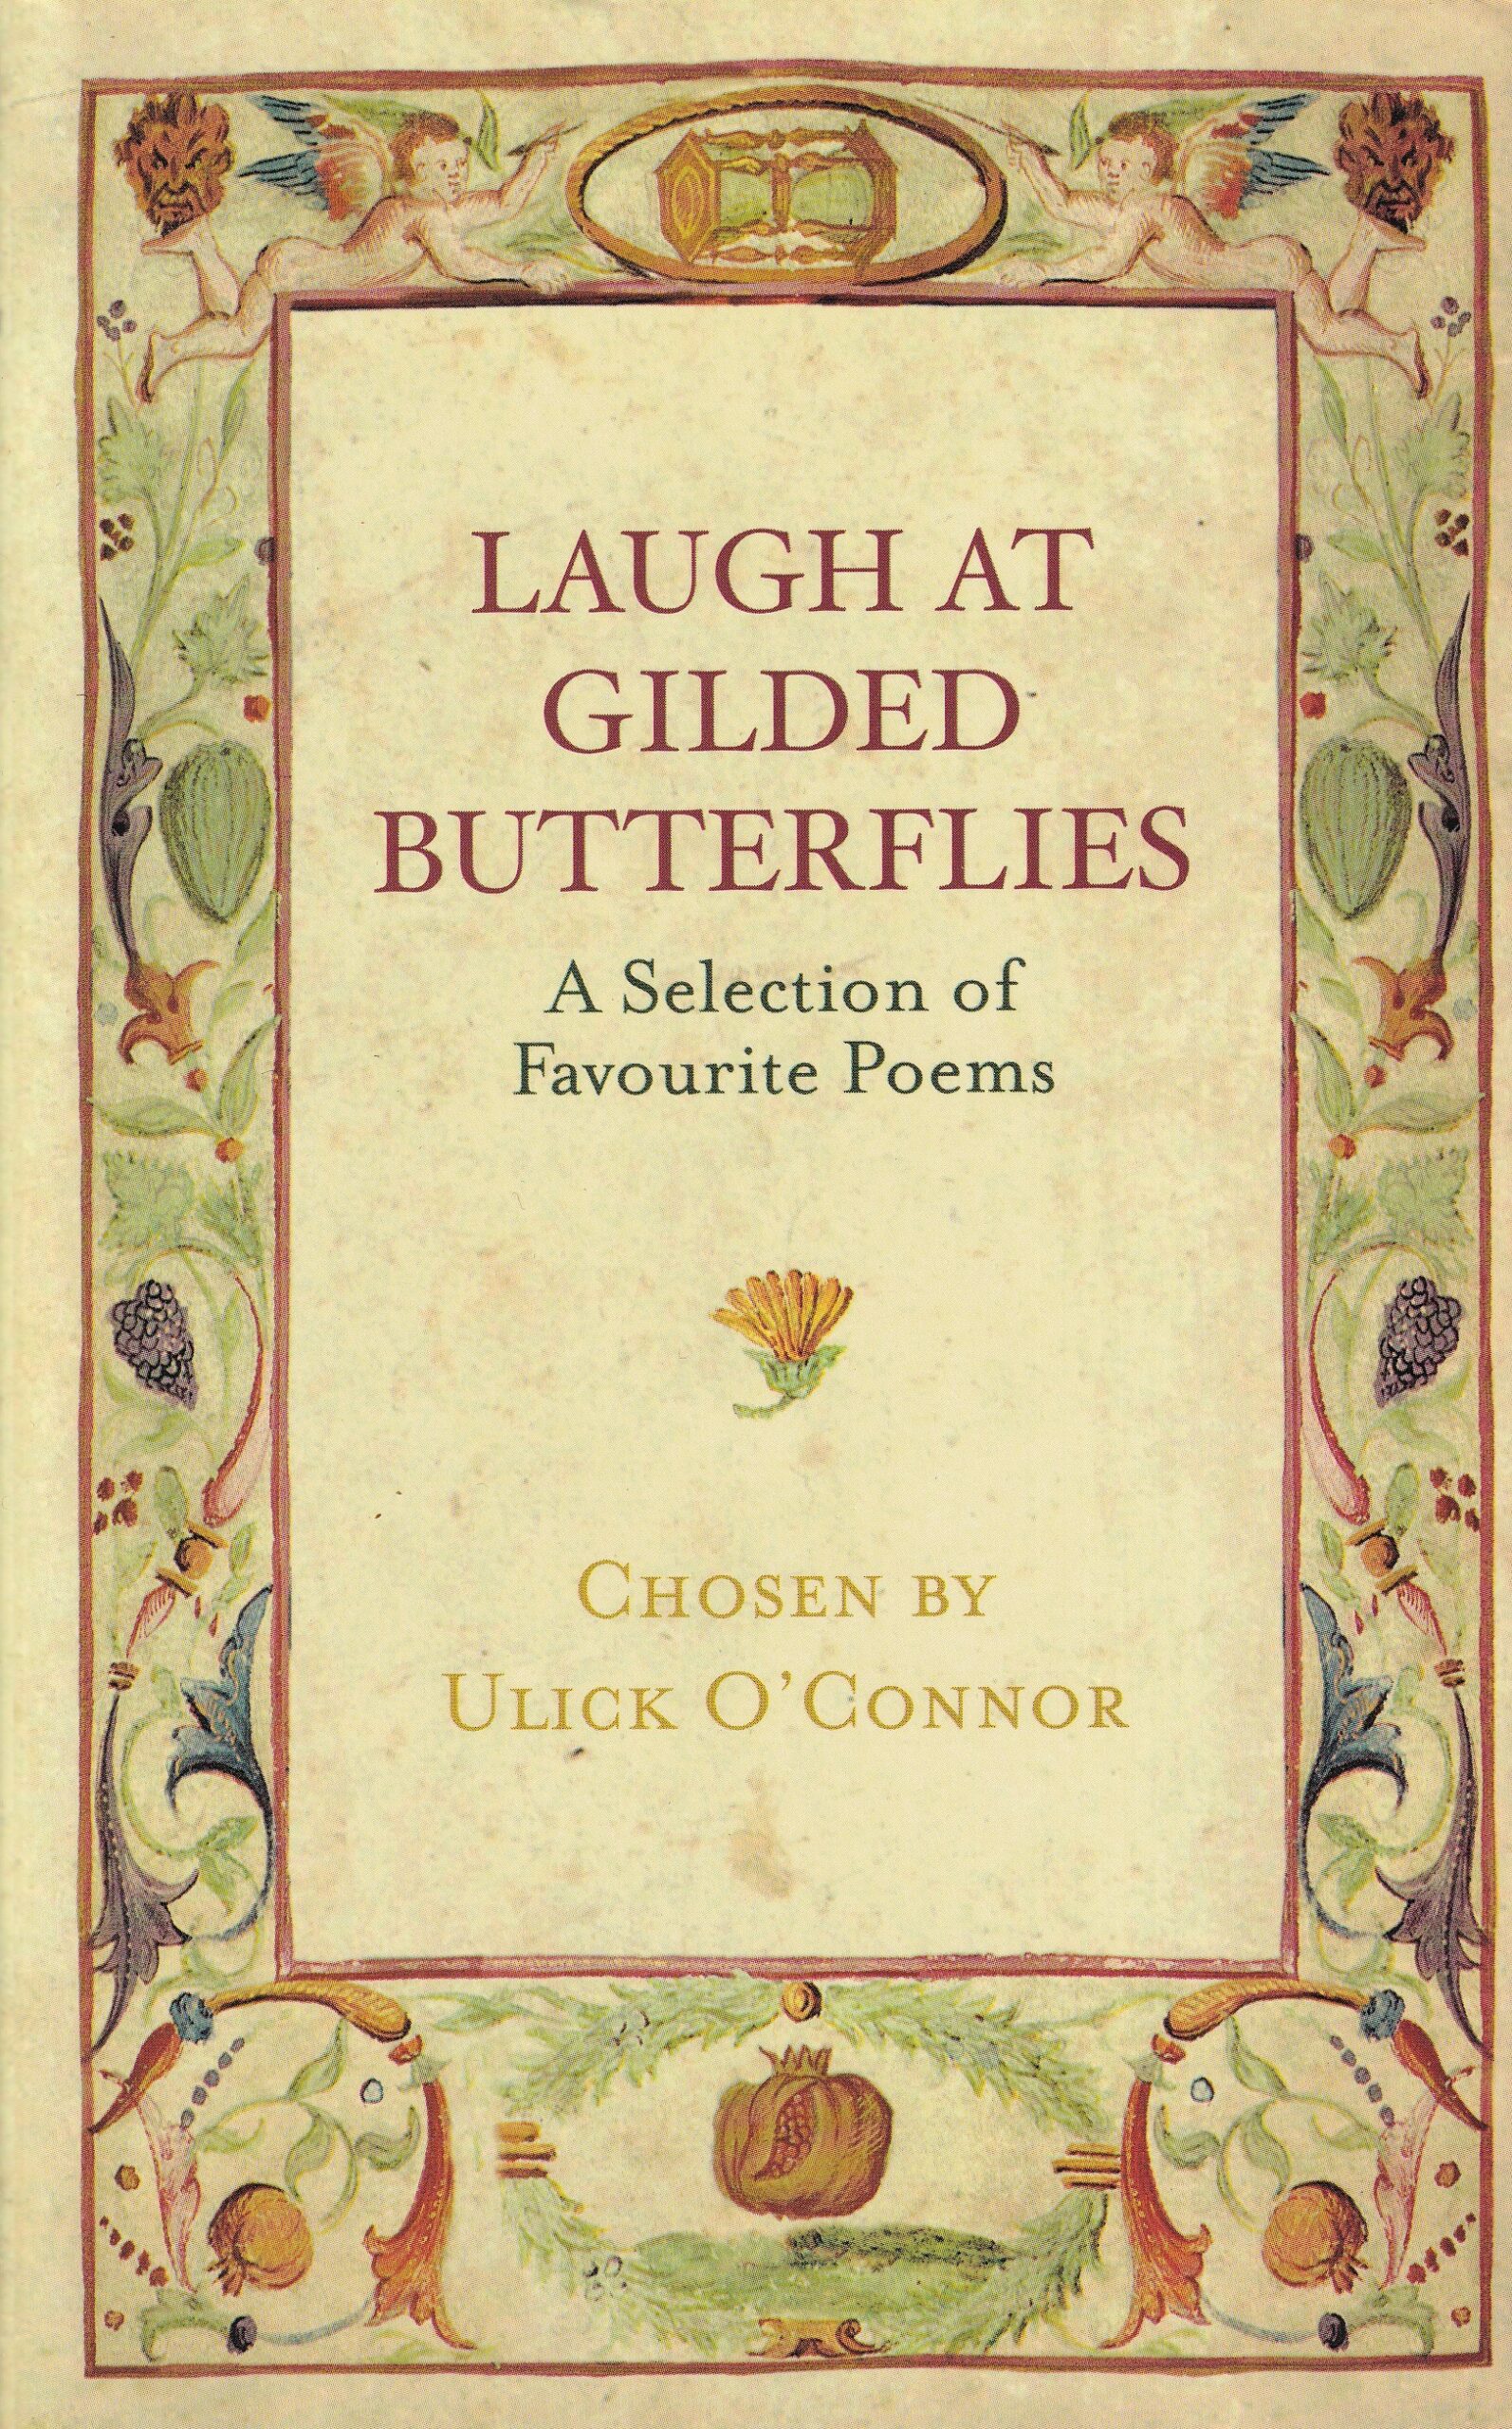 Laugh at Gilded Butterflies: A Selection of Favourite Poems by Ulick O'Connor (ed.)